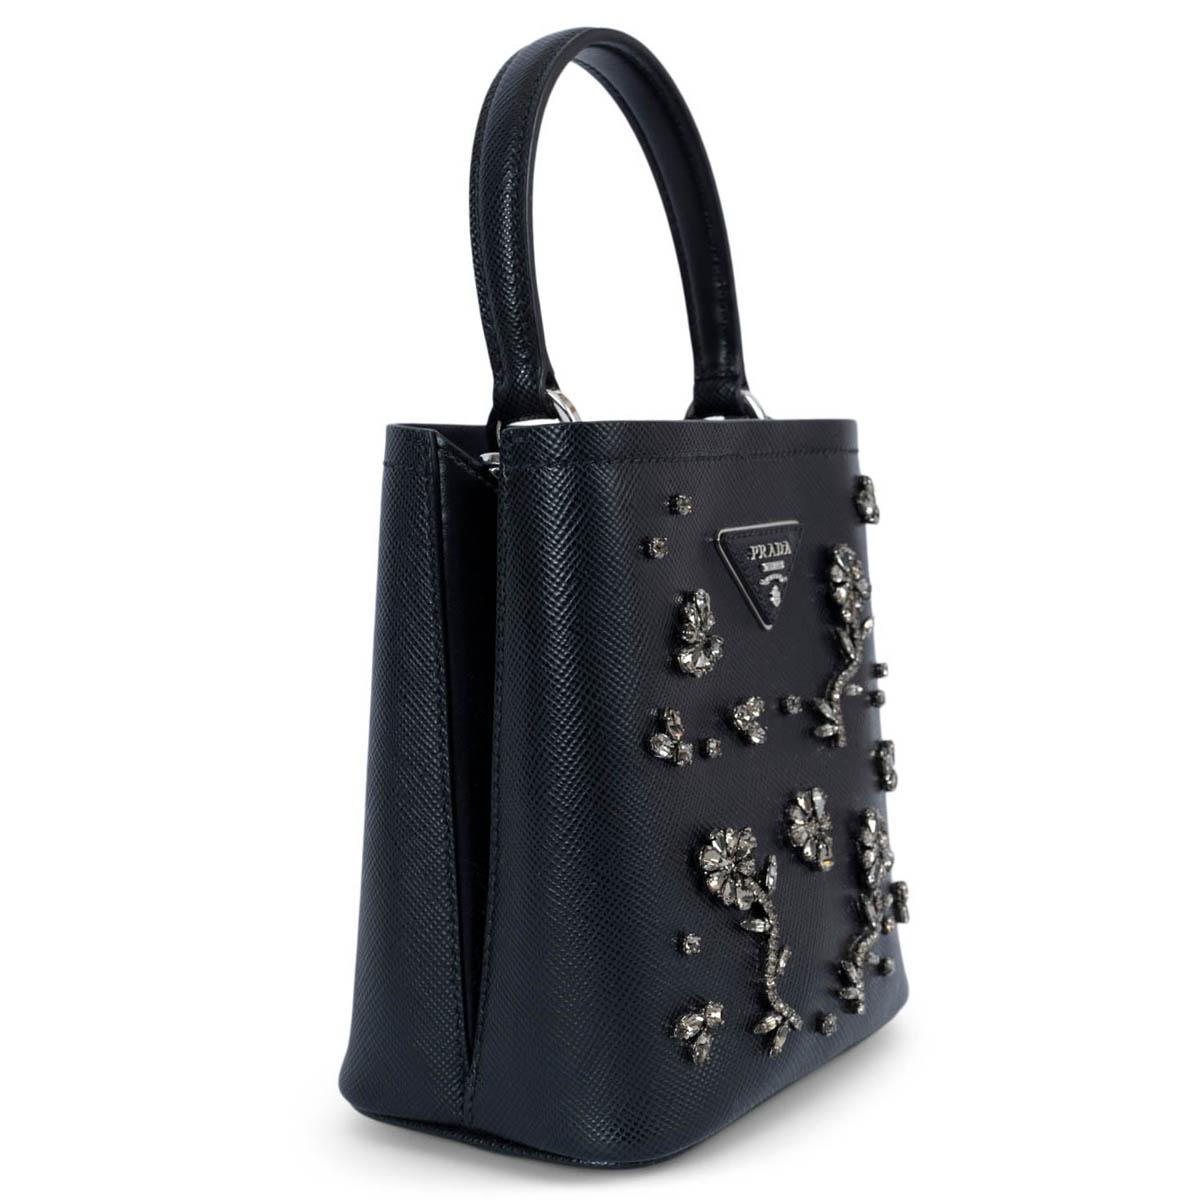 100% authentic Prada Crystal Panier Small Bucket Bag made of the iconic texture of black Saffiano leather embellished with crystal flowers and silver-tone hardware. The elegant design of the bag with single handle is distinguished for the magnetic